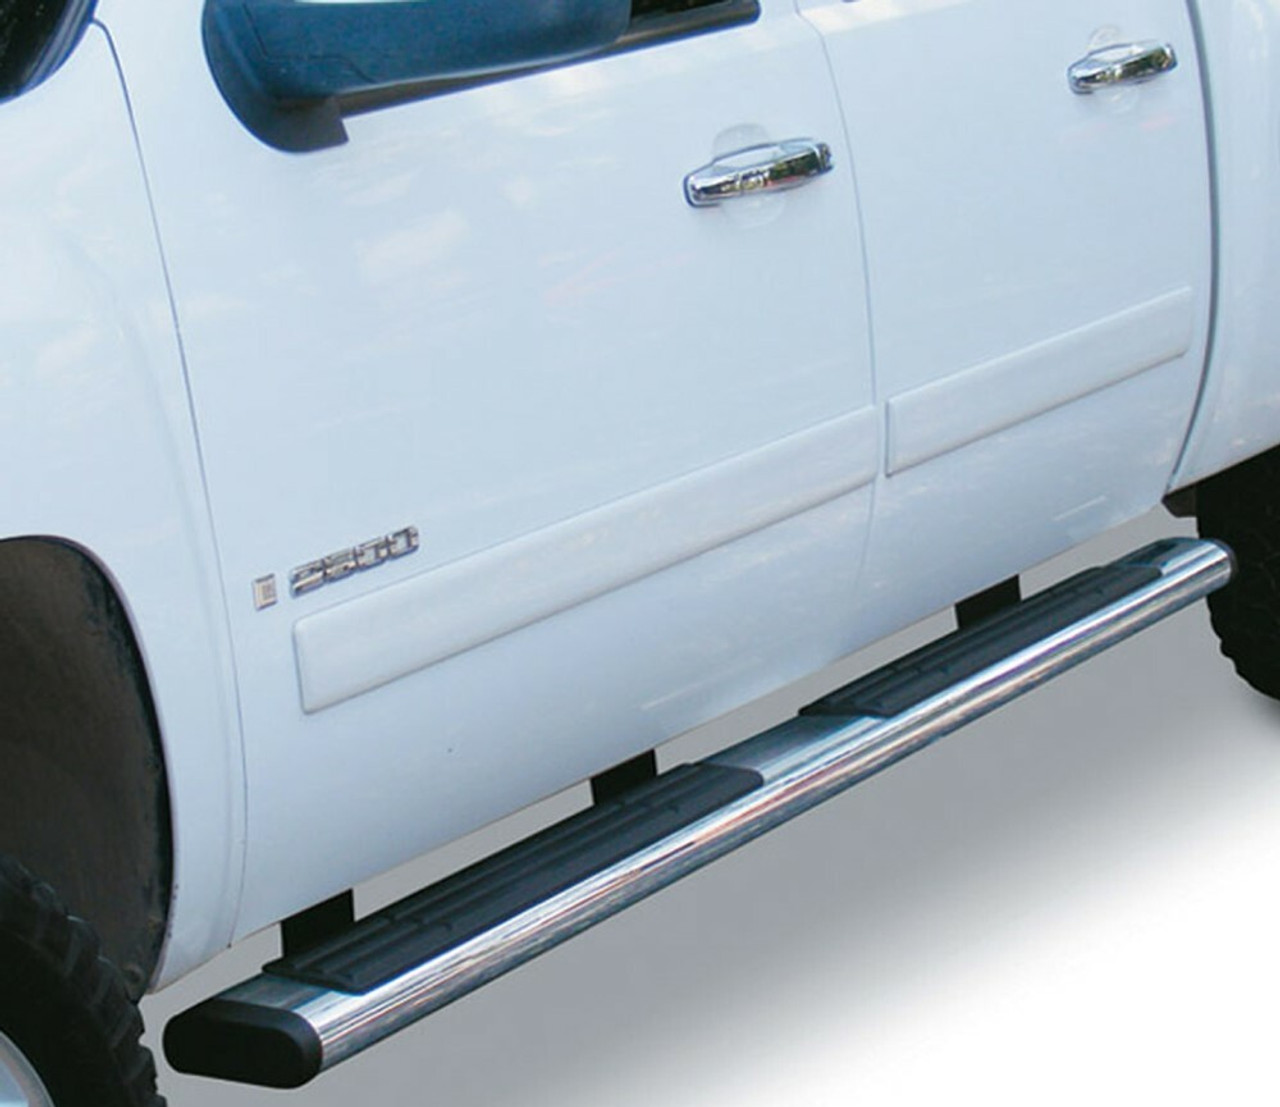 Go Rhino 686403580T Chevrolet, Colorado, 2015 - 2021, 6 inch OE Xtreme - Complete Kit: SideSteps + Brackets, Galvanized Steel, Textured black, 660080T bars + 6840355 OE Xtreme Brackets. 6 inch wide x 80 inch long side bars